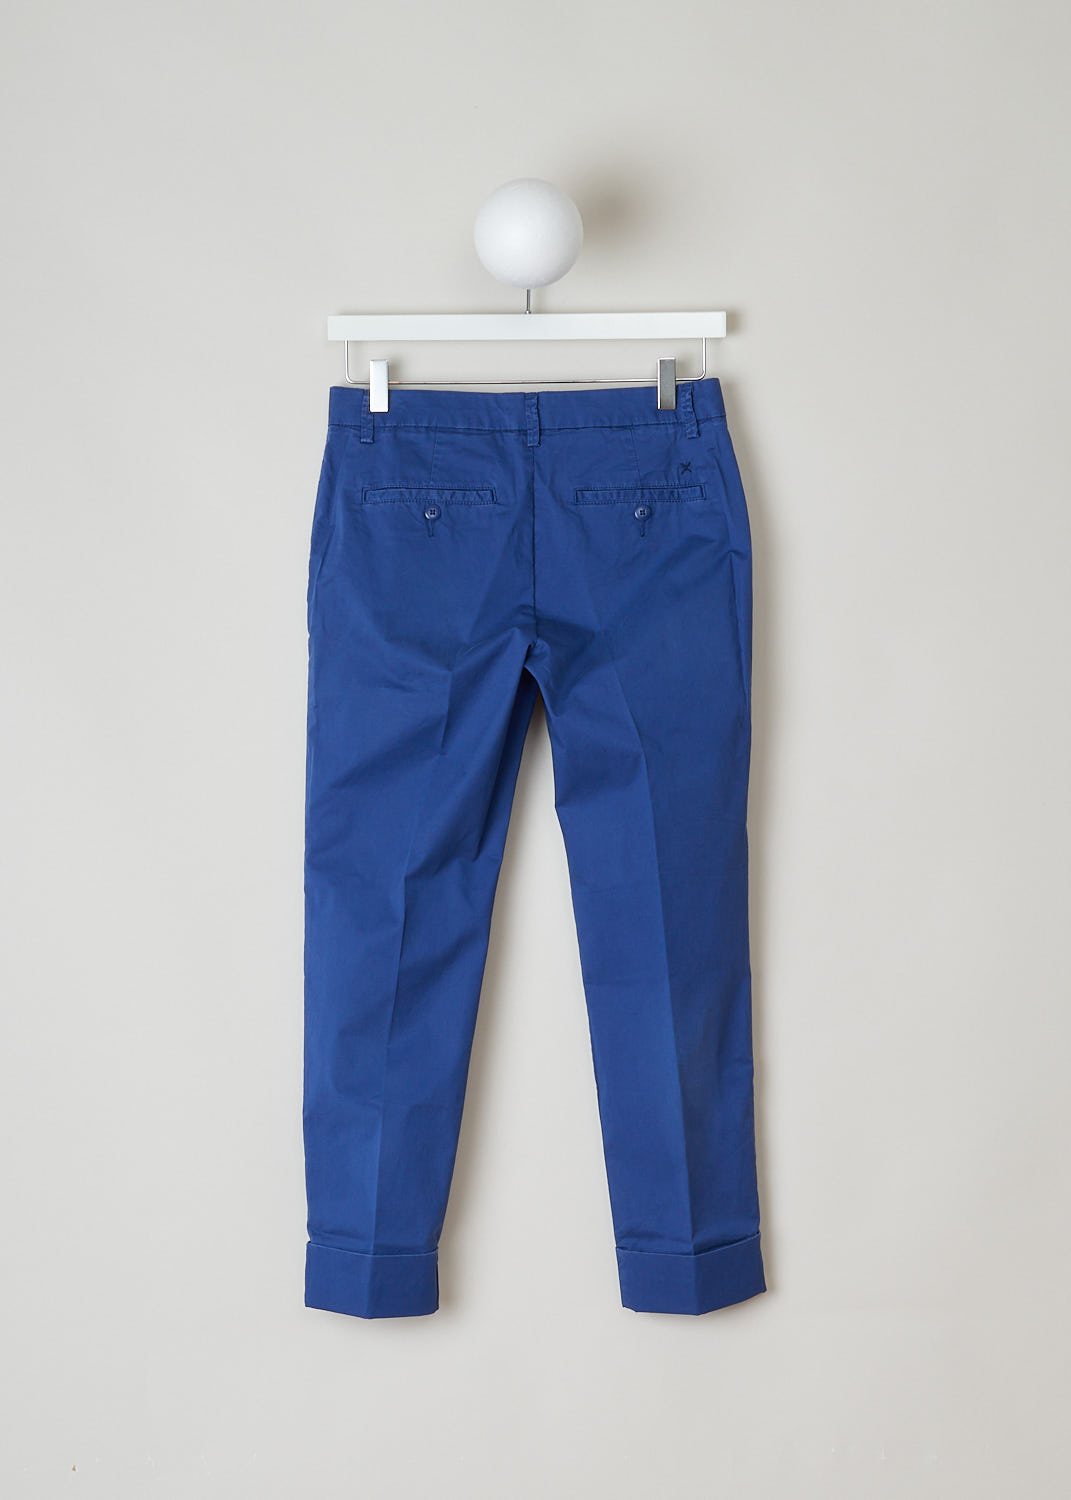 CLOSED CLASSIC BLUE TROUSERS STEWART_C91796_53S_SR_582 Blue Back, These classic trousers in blue feature belt loops and a zipper and button closure. They feature slanted pockets on the front and two buttoned welt pockets on the back. What makes this model stand out the is the broad fold-over hem.